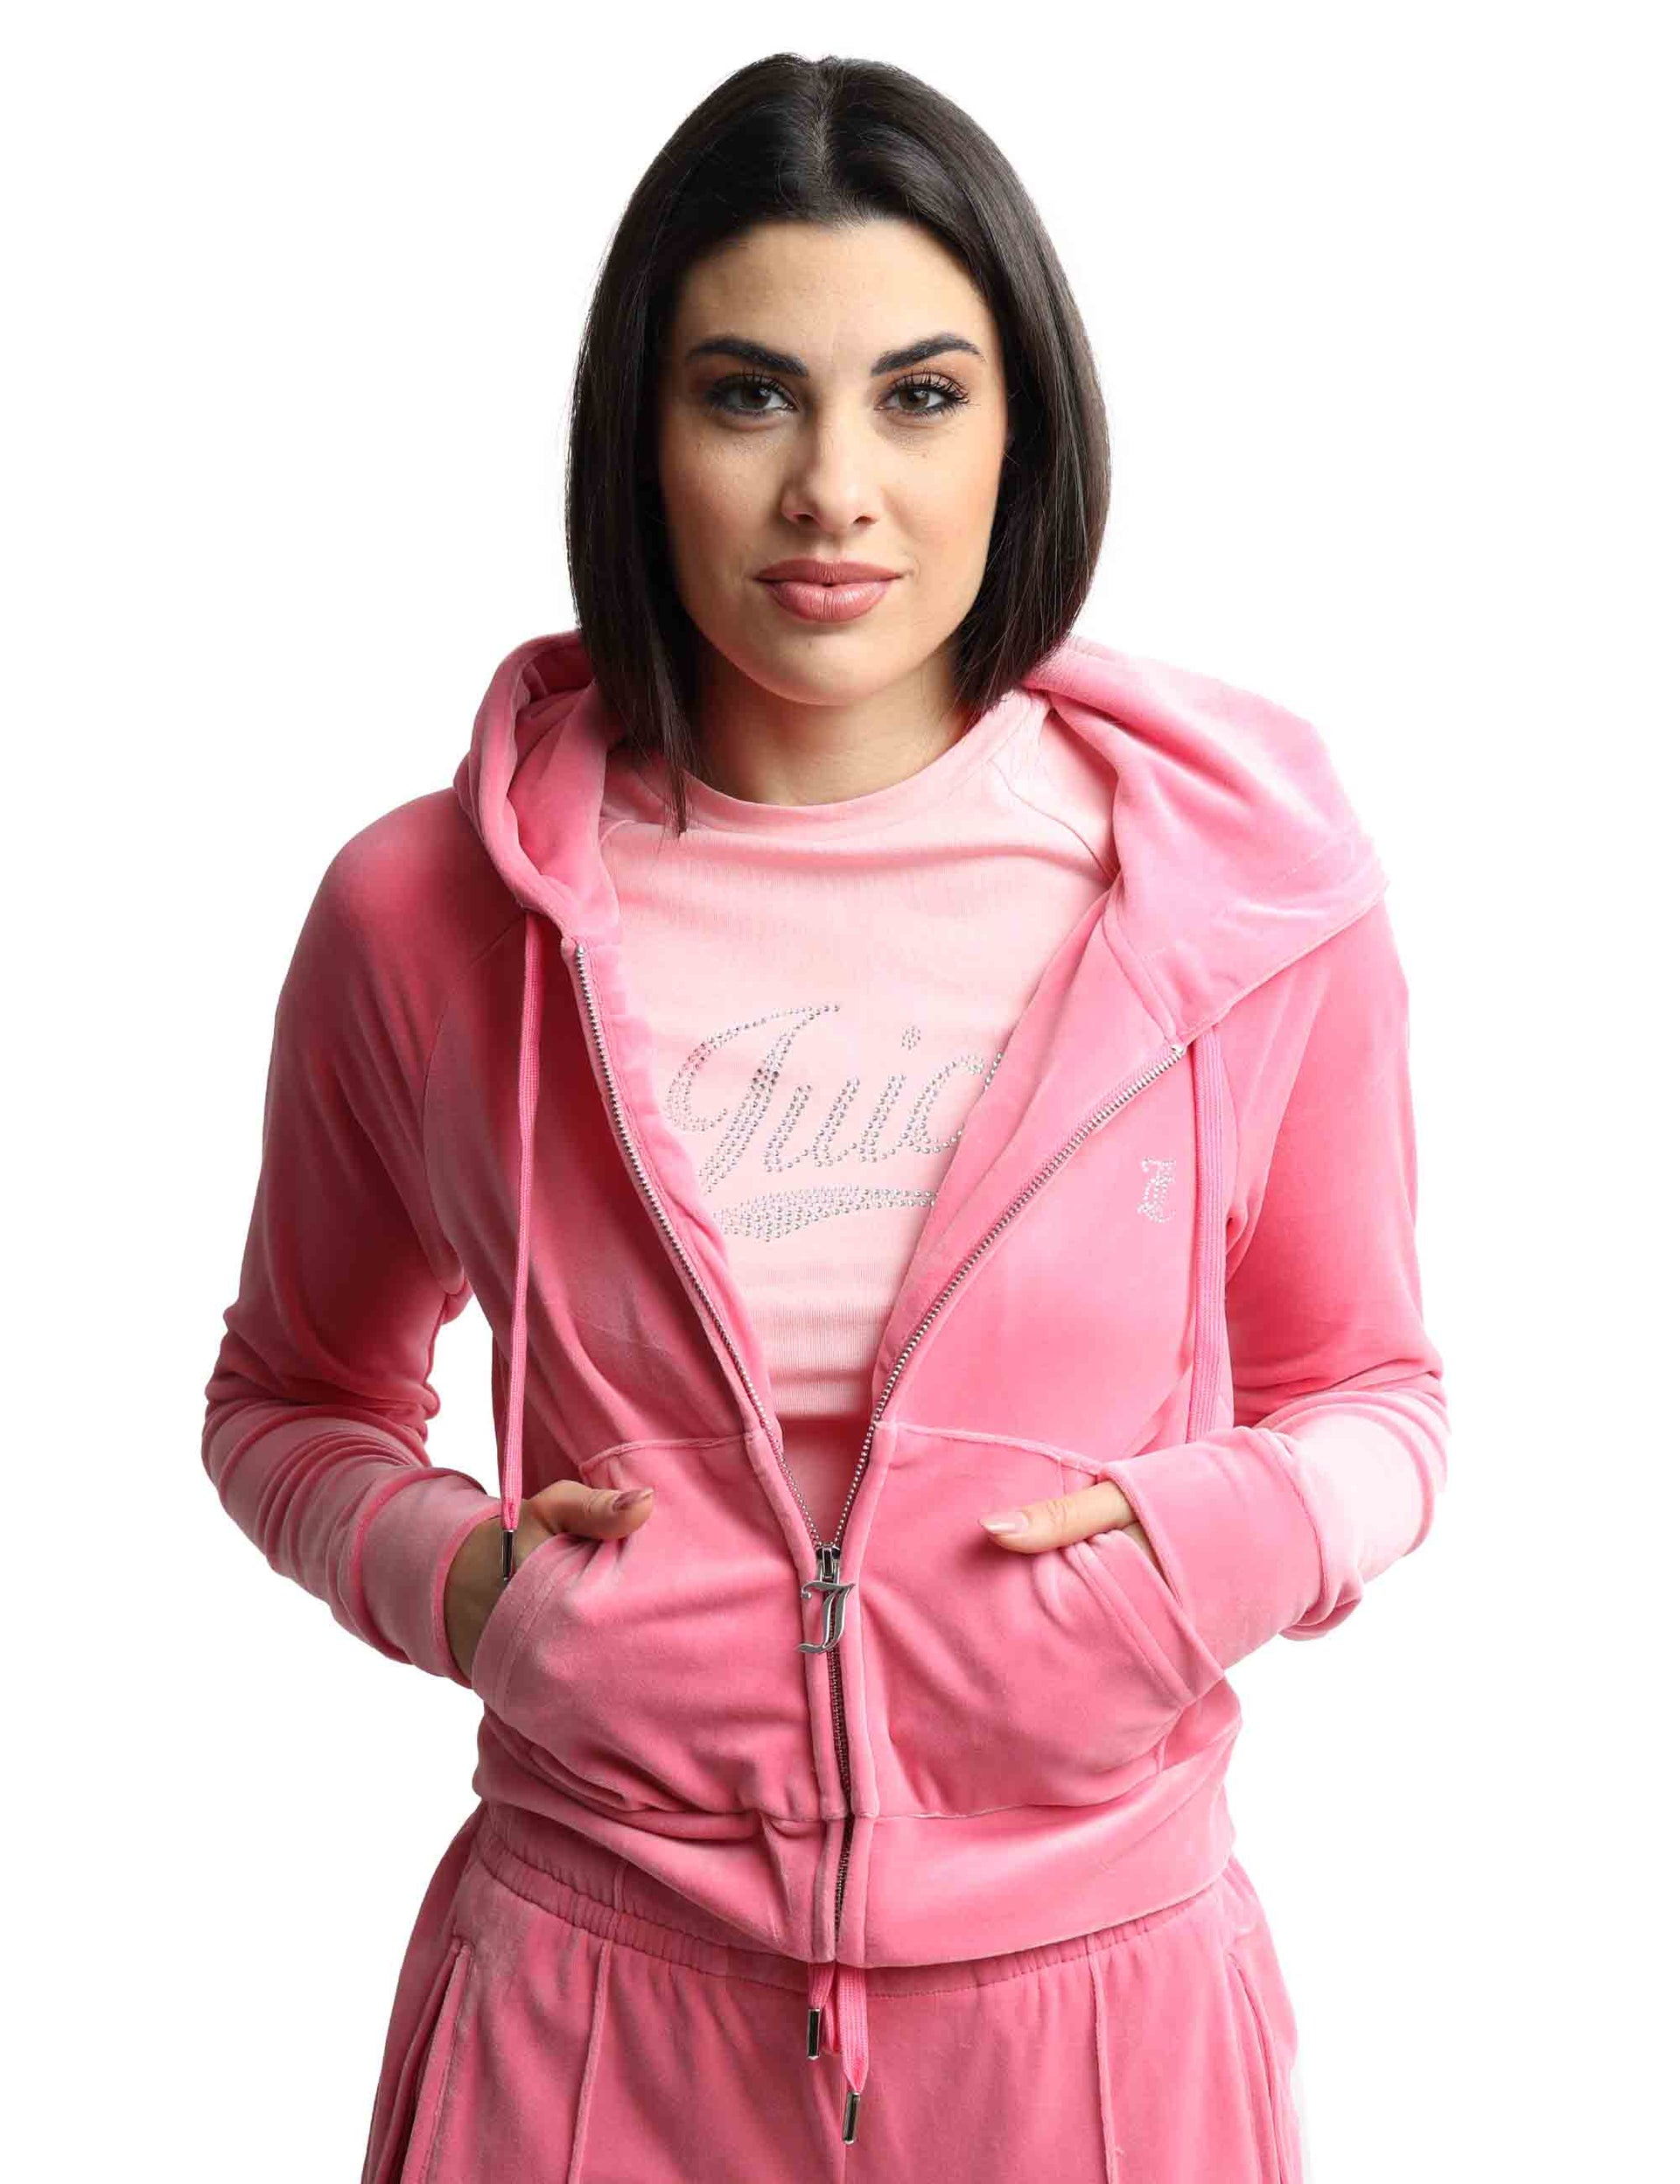 Madison women's sweatshirts in pink fabric with hood and zip